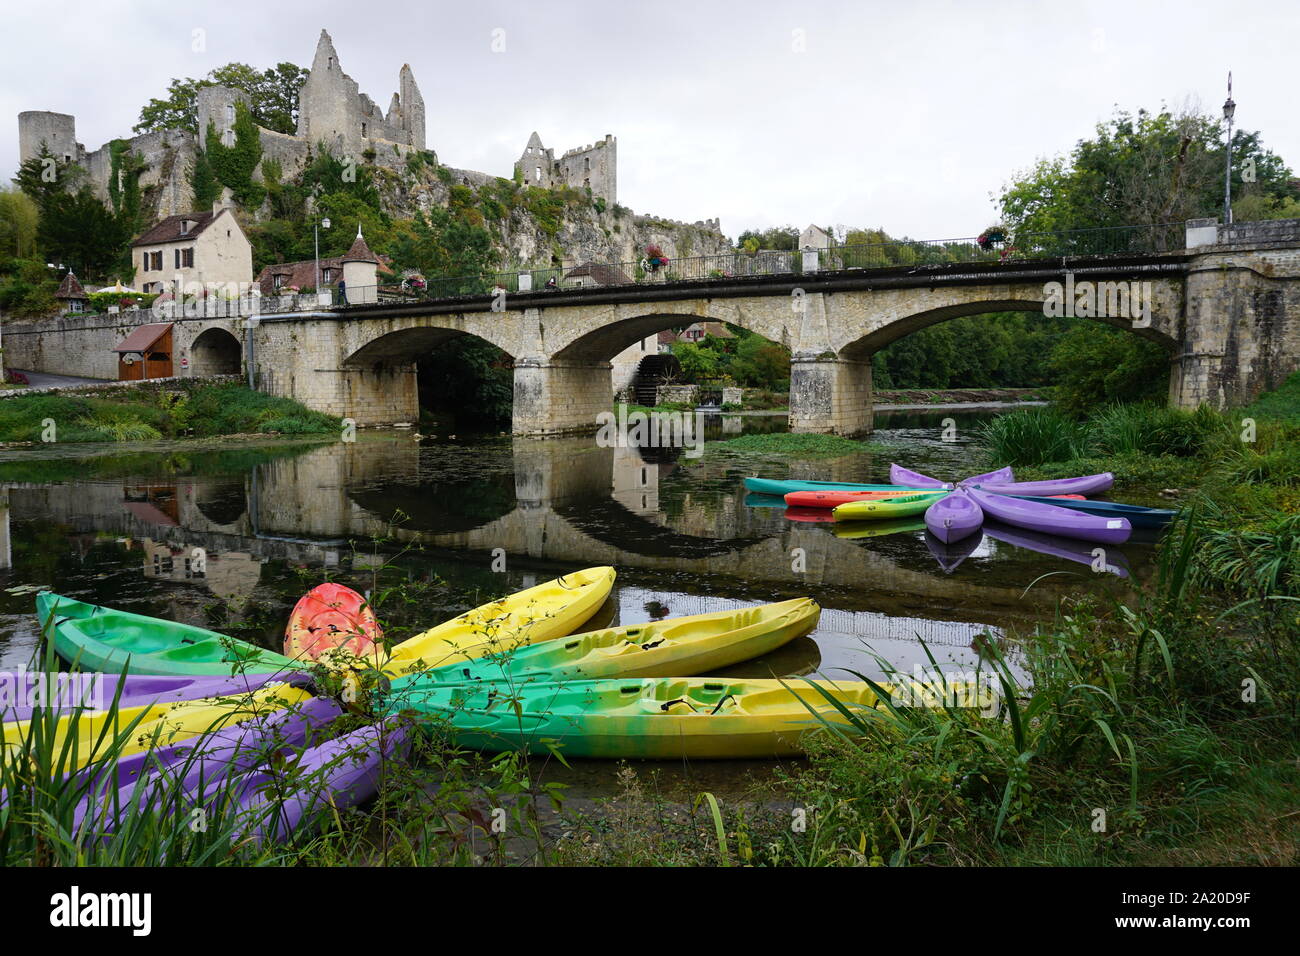 colorful canoes moored as flowers in a small village in France with an old stone fortress and bridge Stock Photo